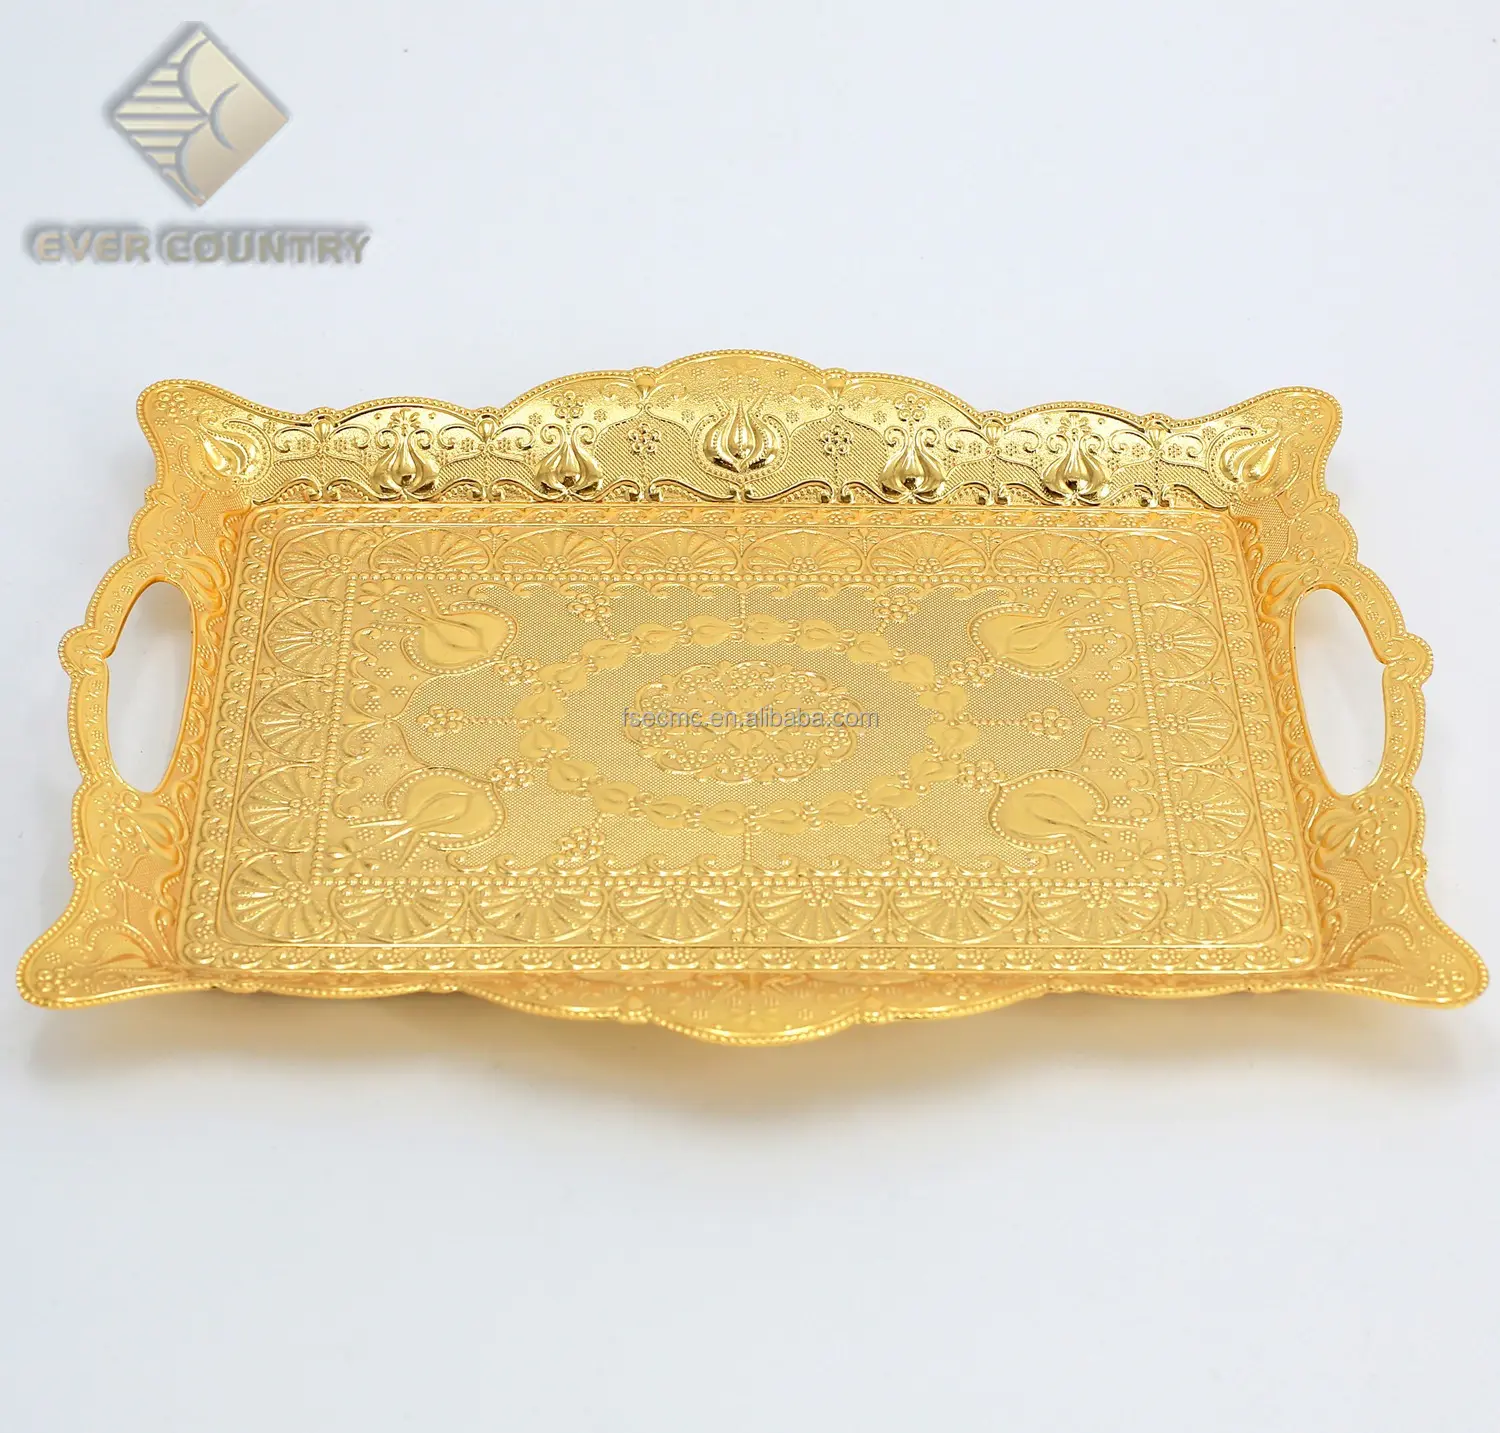 Tulip Design gold plated 13 inch rectangle serving tray